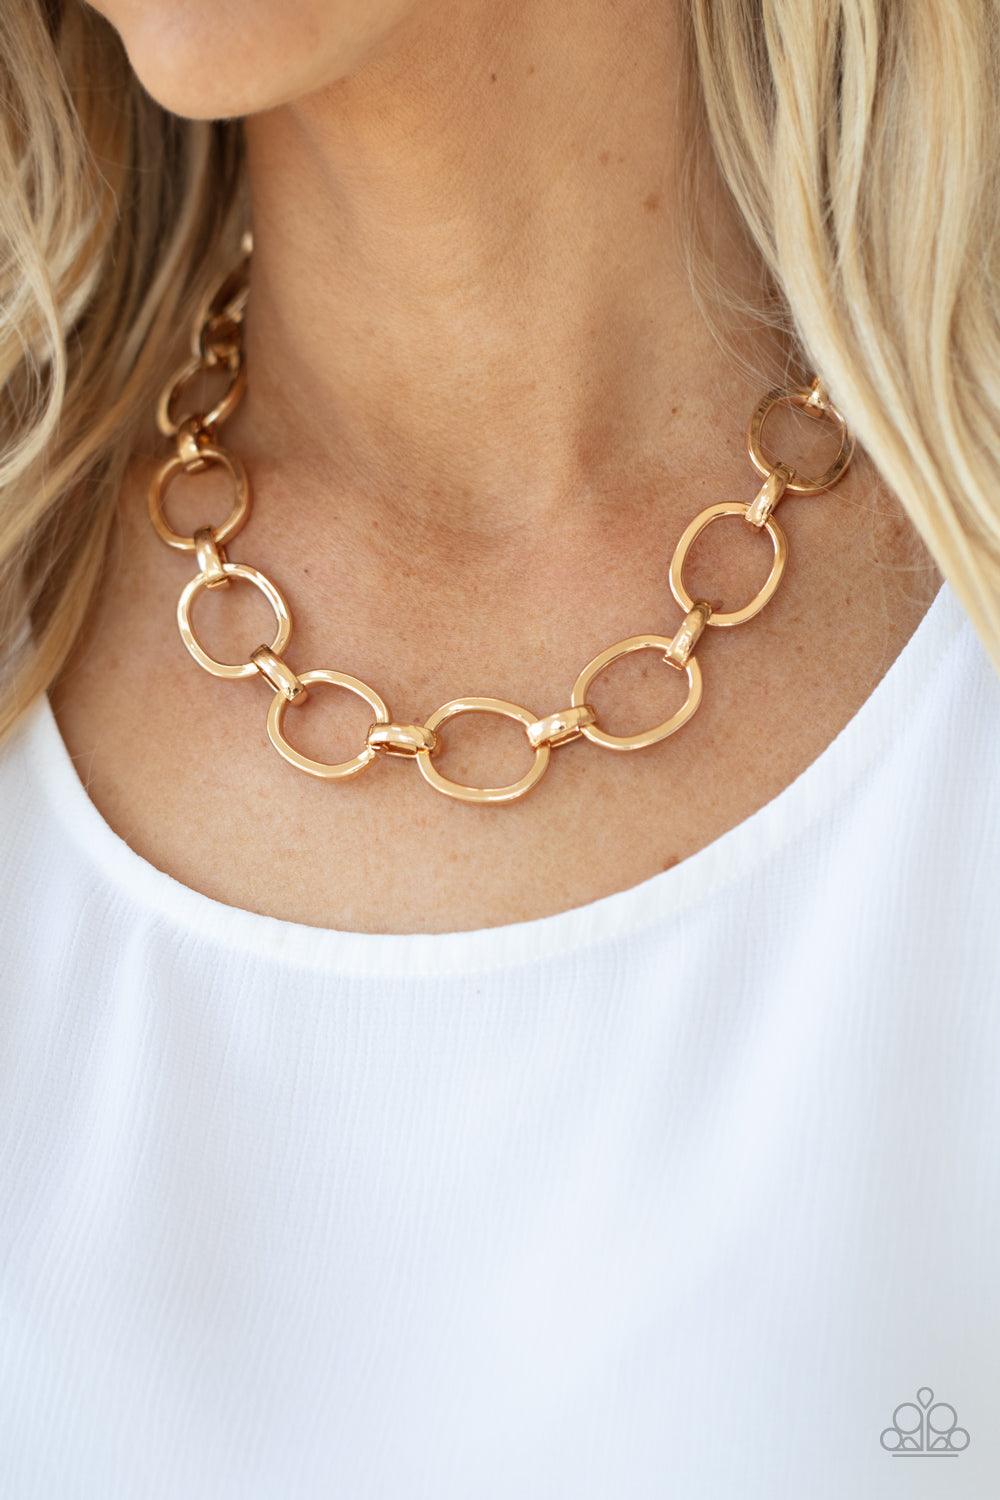 HAUTE-ly Contested Gold Necklace - Jewelry by Bretta